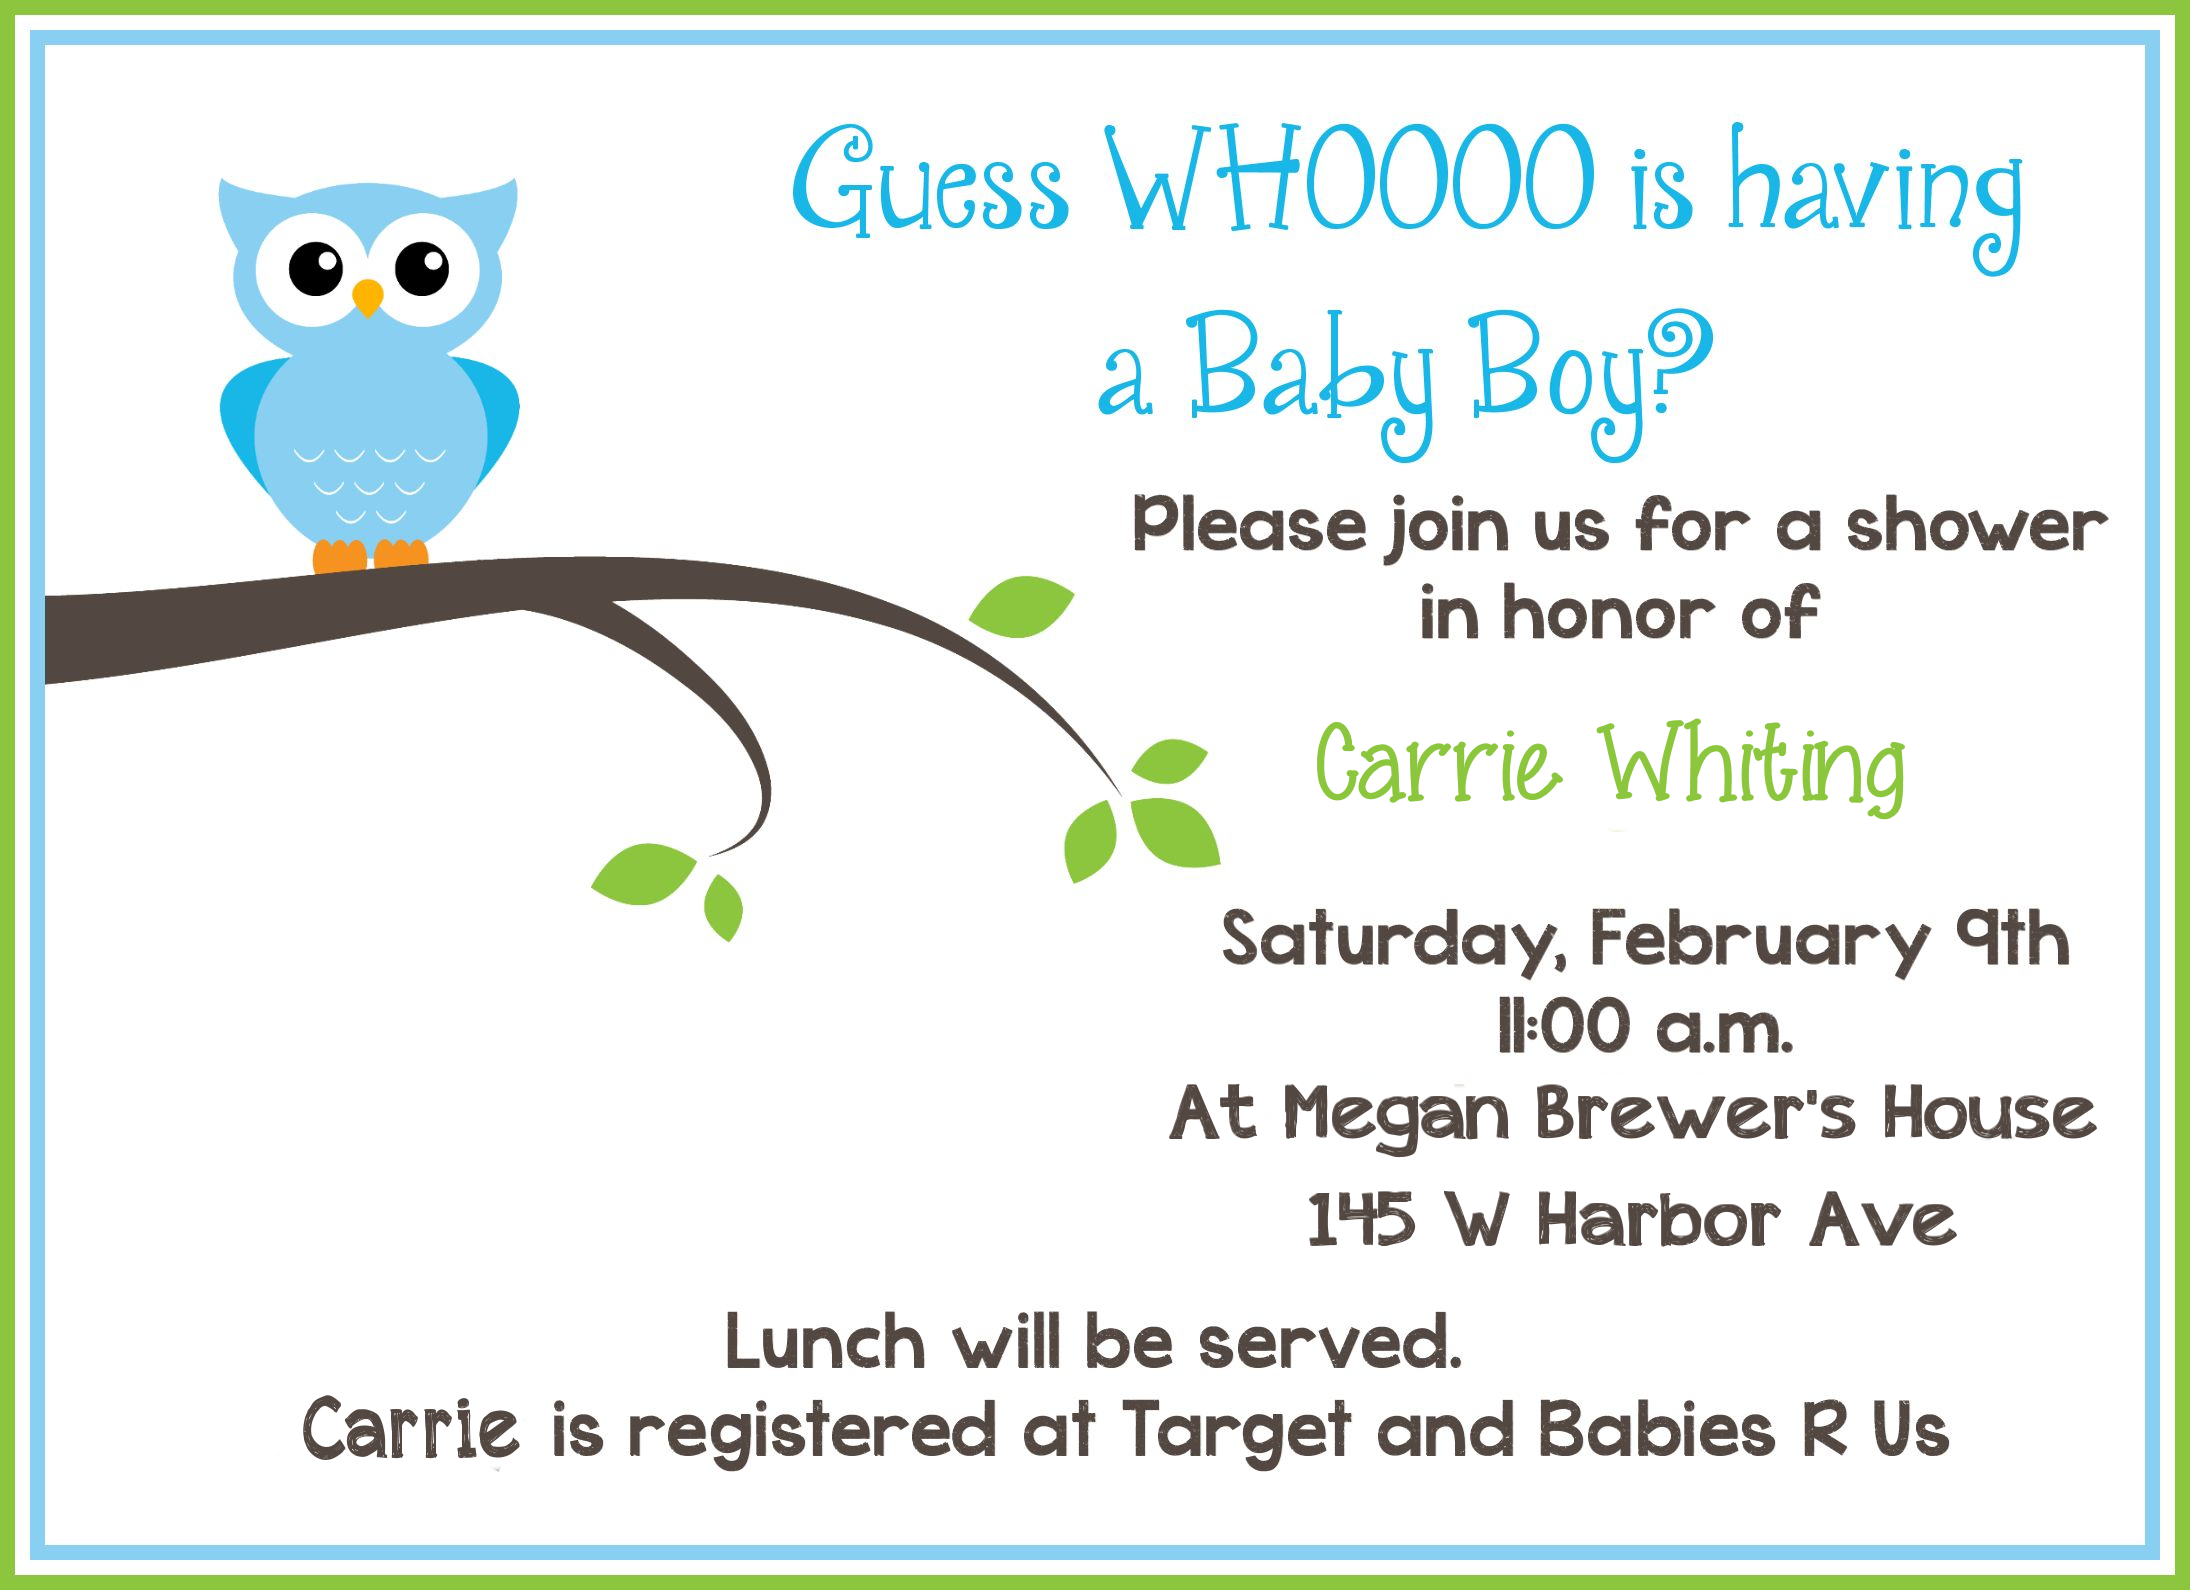 Full Size of Baby Shower:delightful Baby Shower Invitation Wording Picture Designs Baby Shower Invitation Wording Free Printable Owl Baby Shower Invitations Other Printables Free Printable Owl Baby Shower Invitations Sample